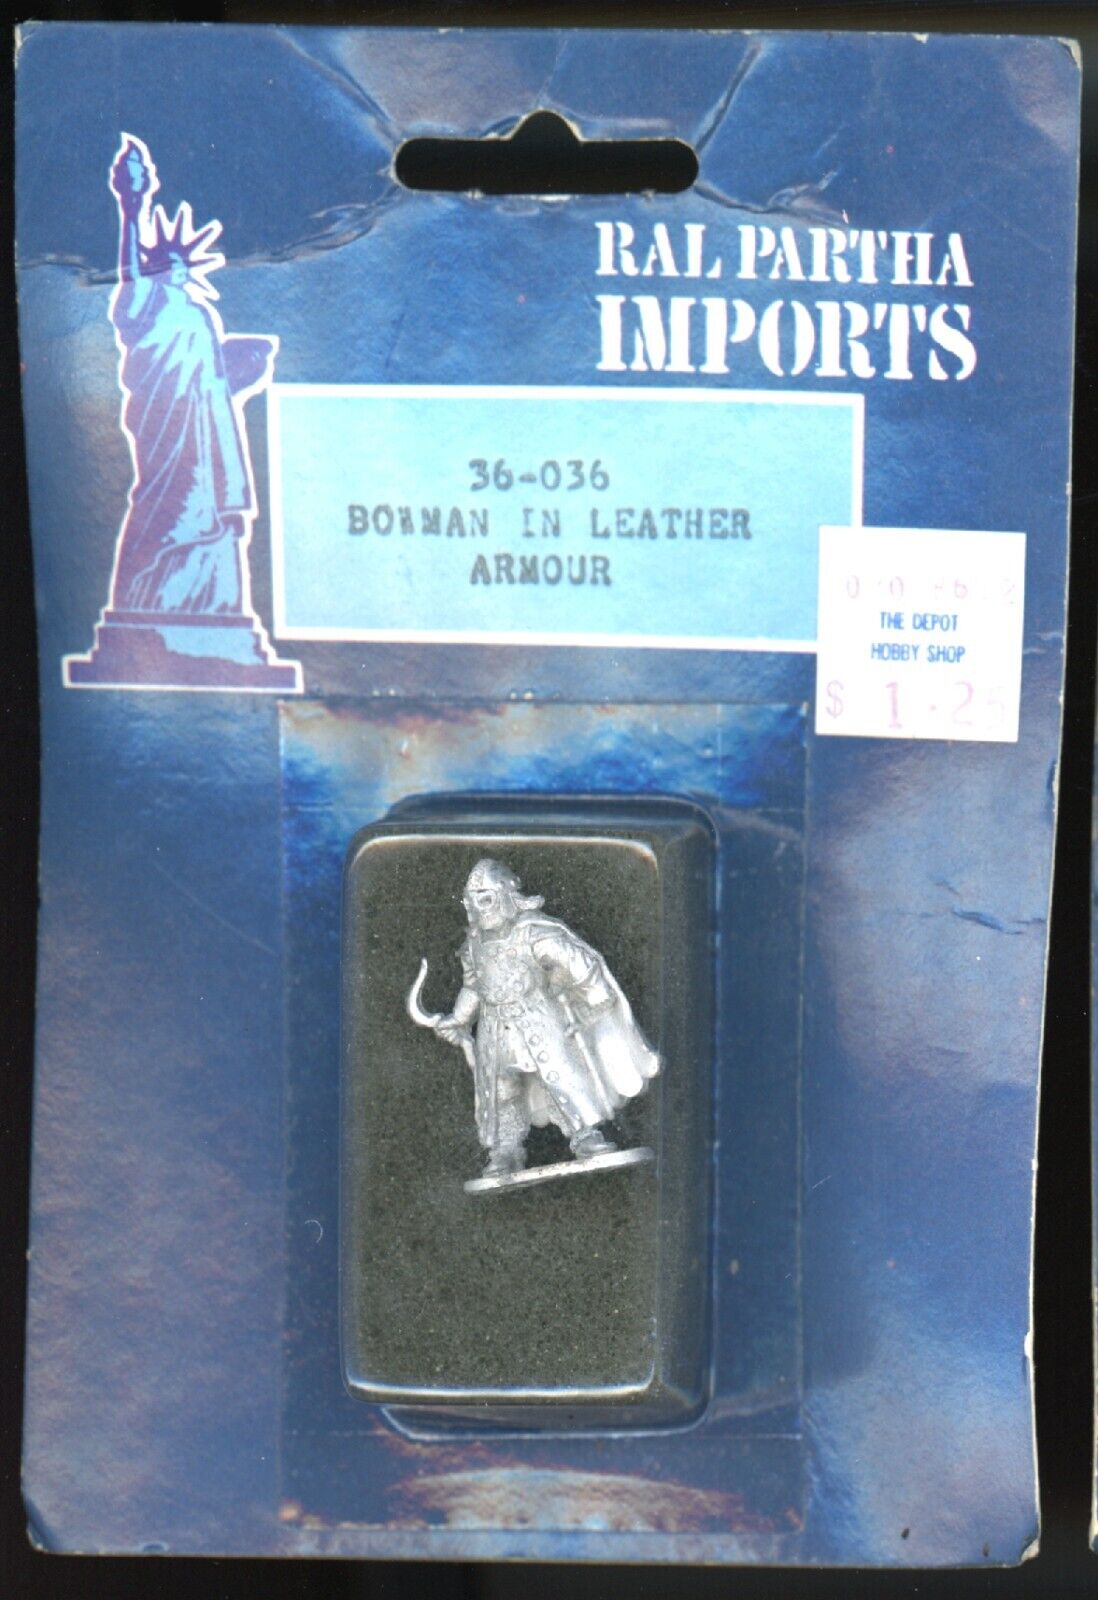 BOWMAN IN LEATHER ARMOUR Ral Partha Imports D&D Miniature Original Packaging Dungeons & Dragons Miniature Toy - Hobby Gems